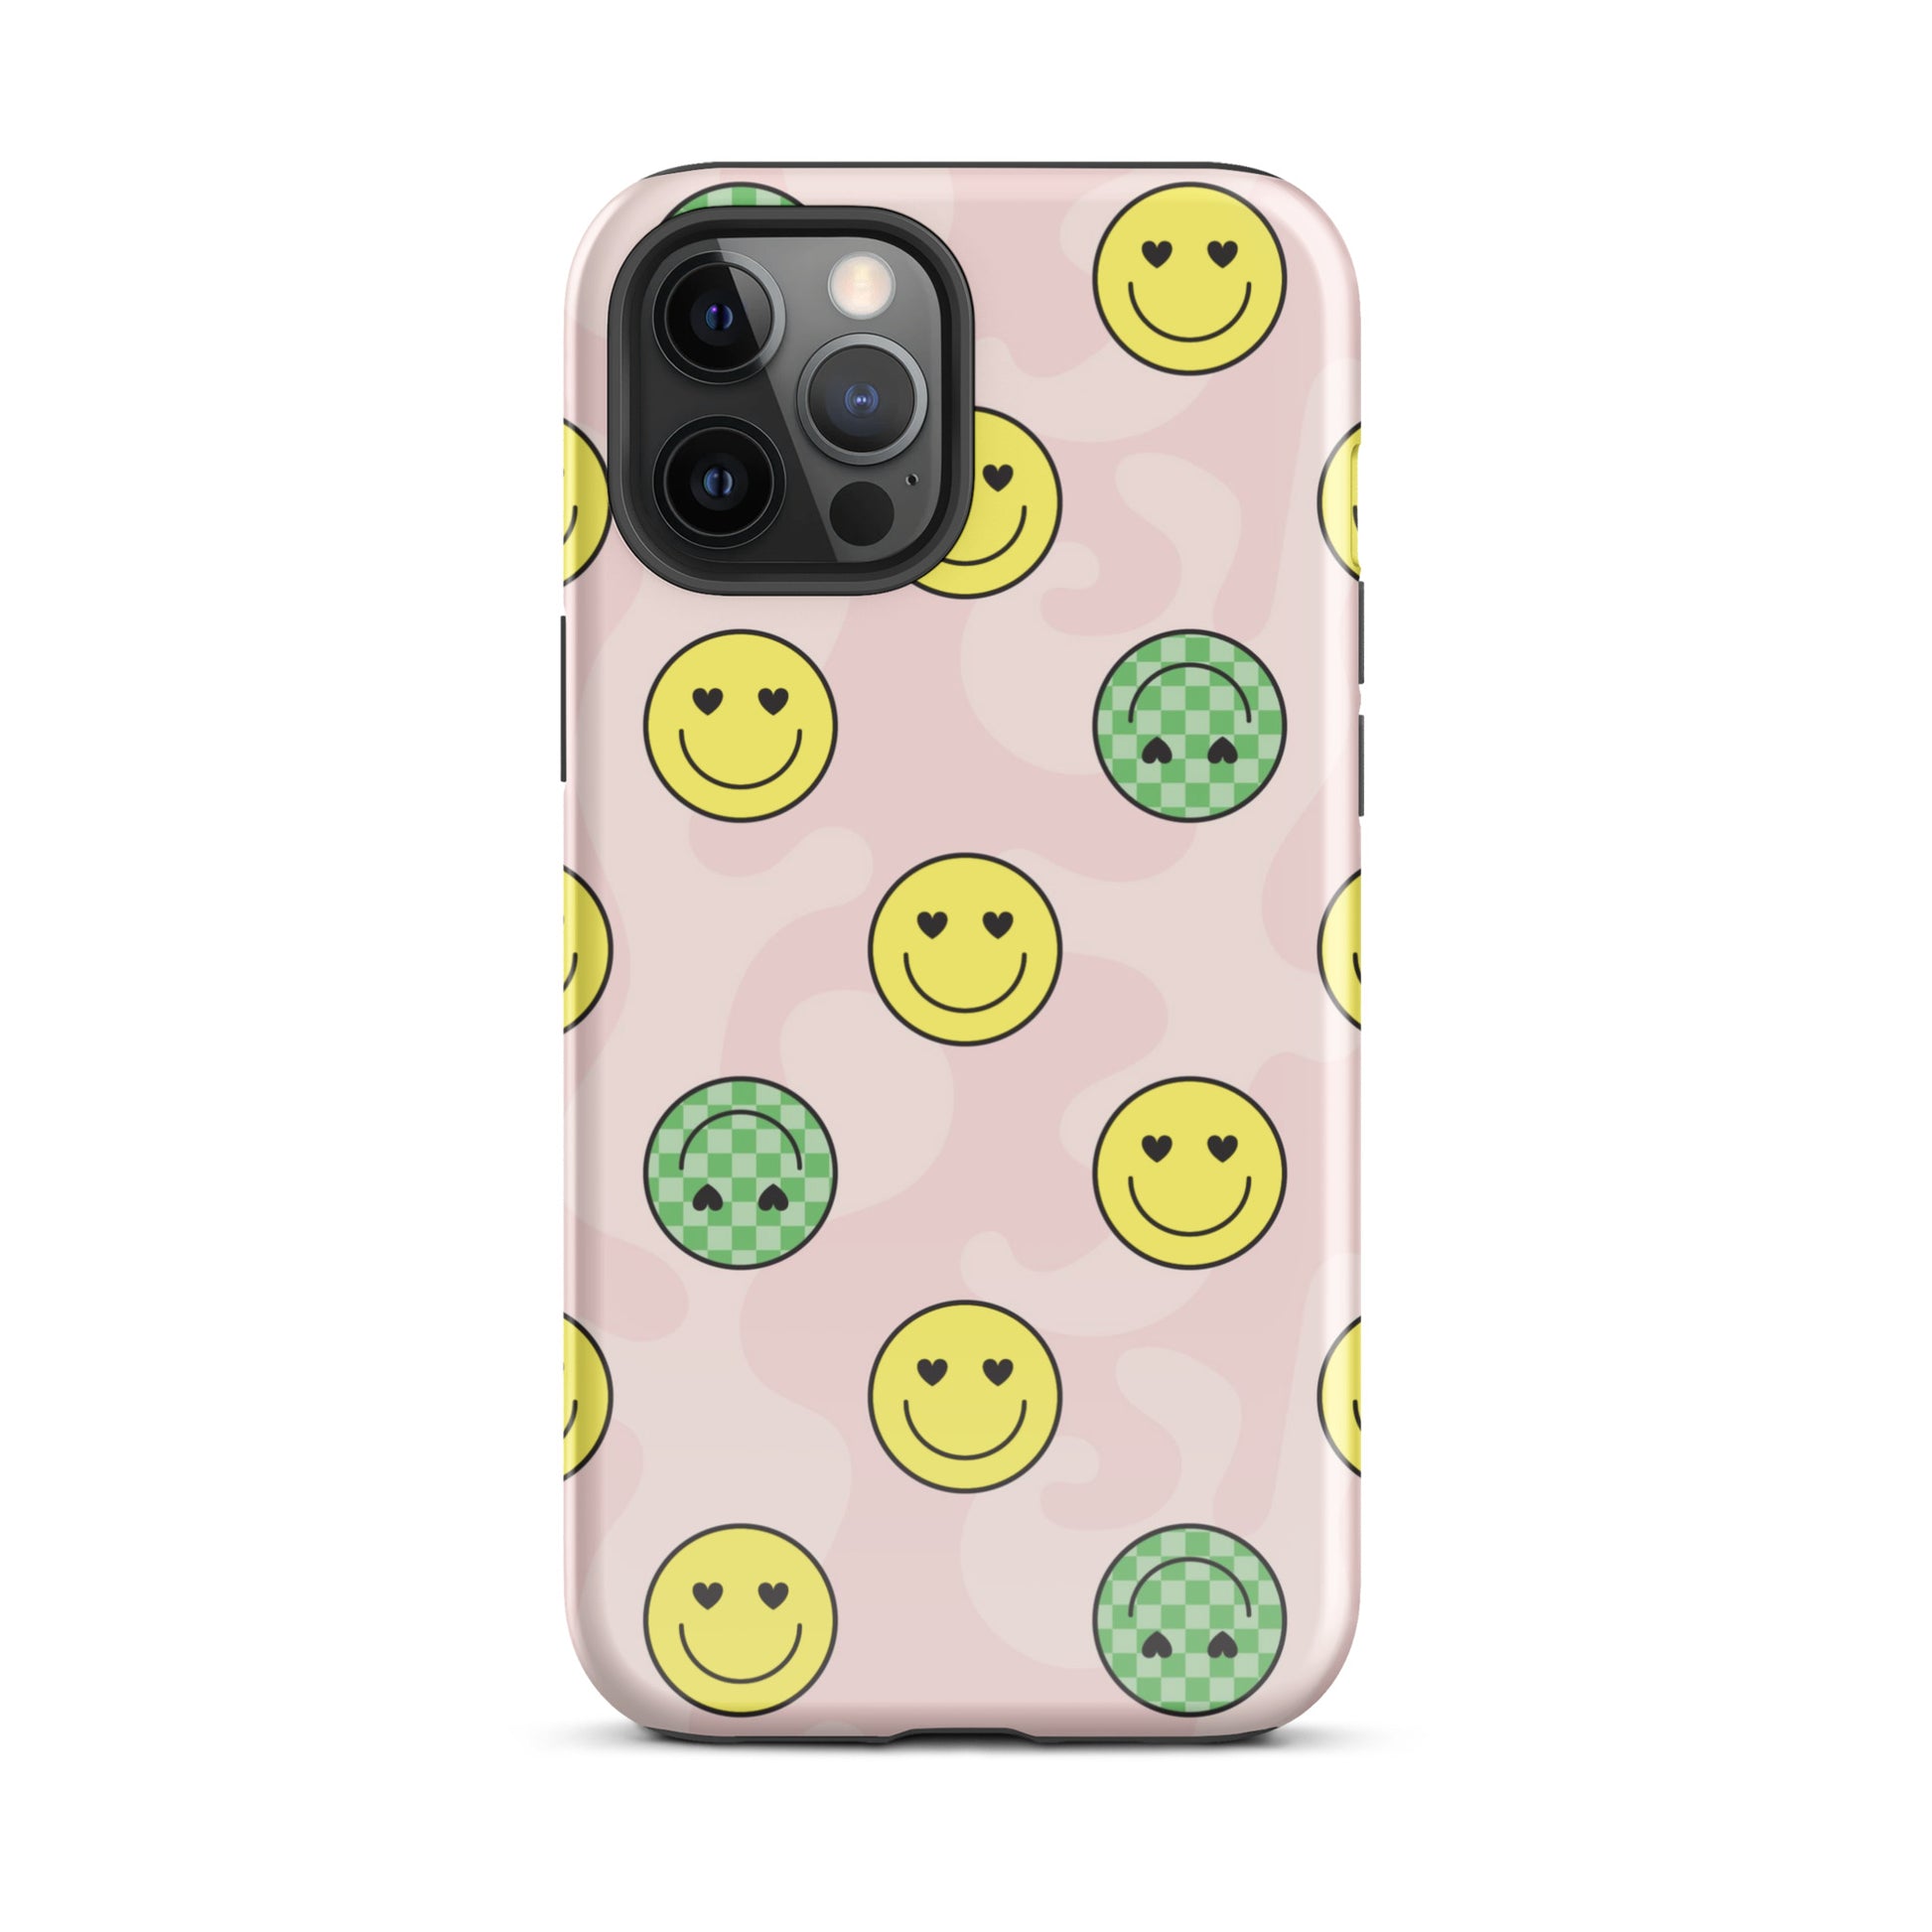 Preppy Smiley Faces iPhone Case iPhone 12 Pro Max Glossy